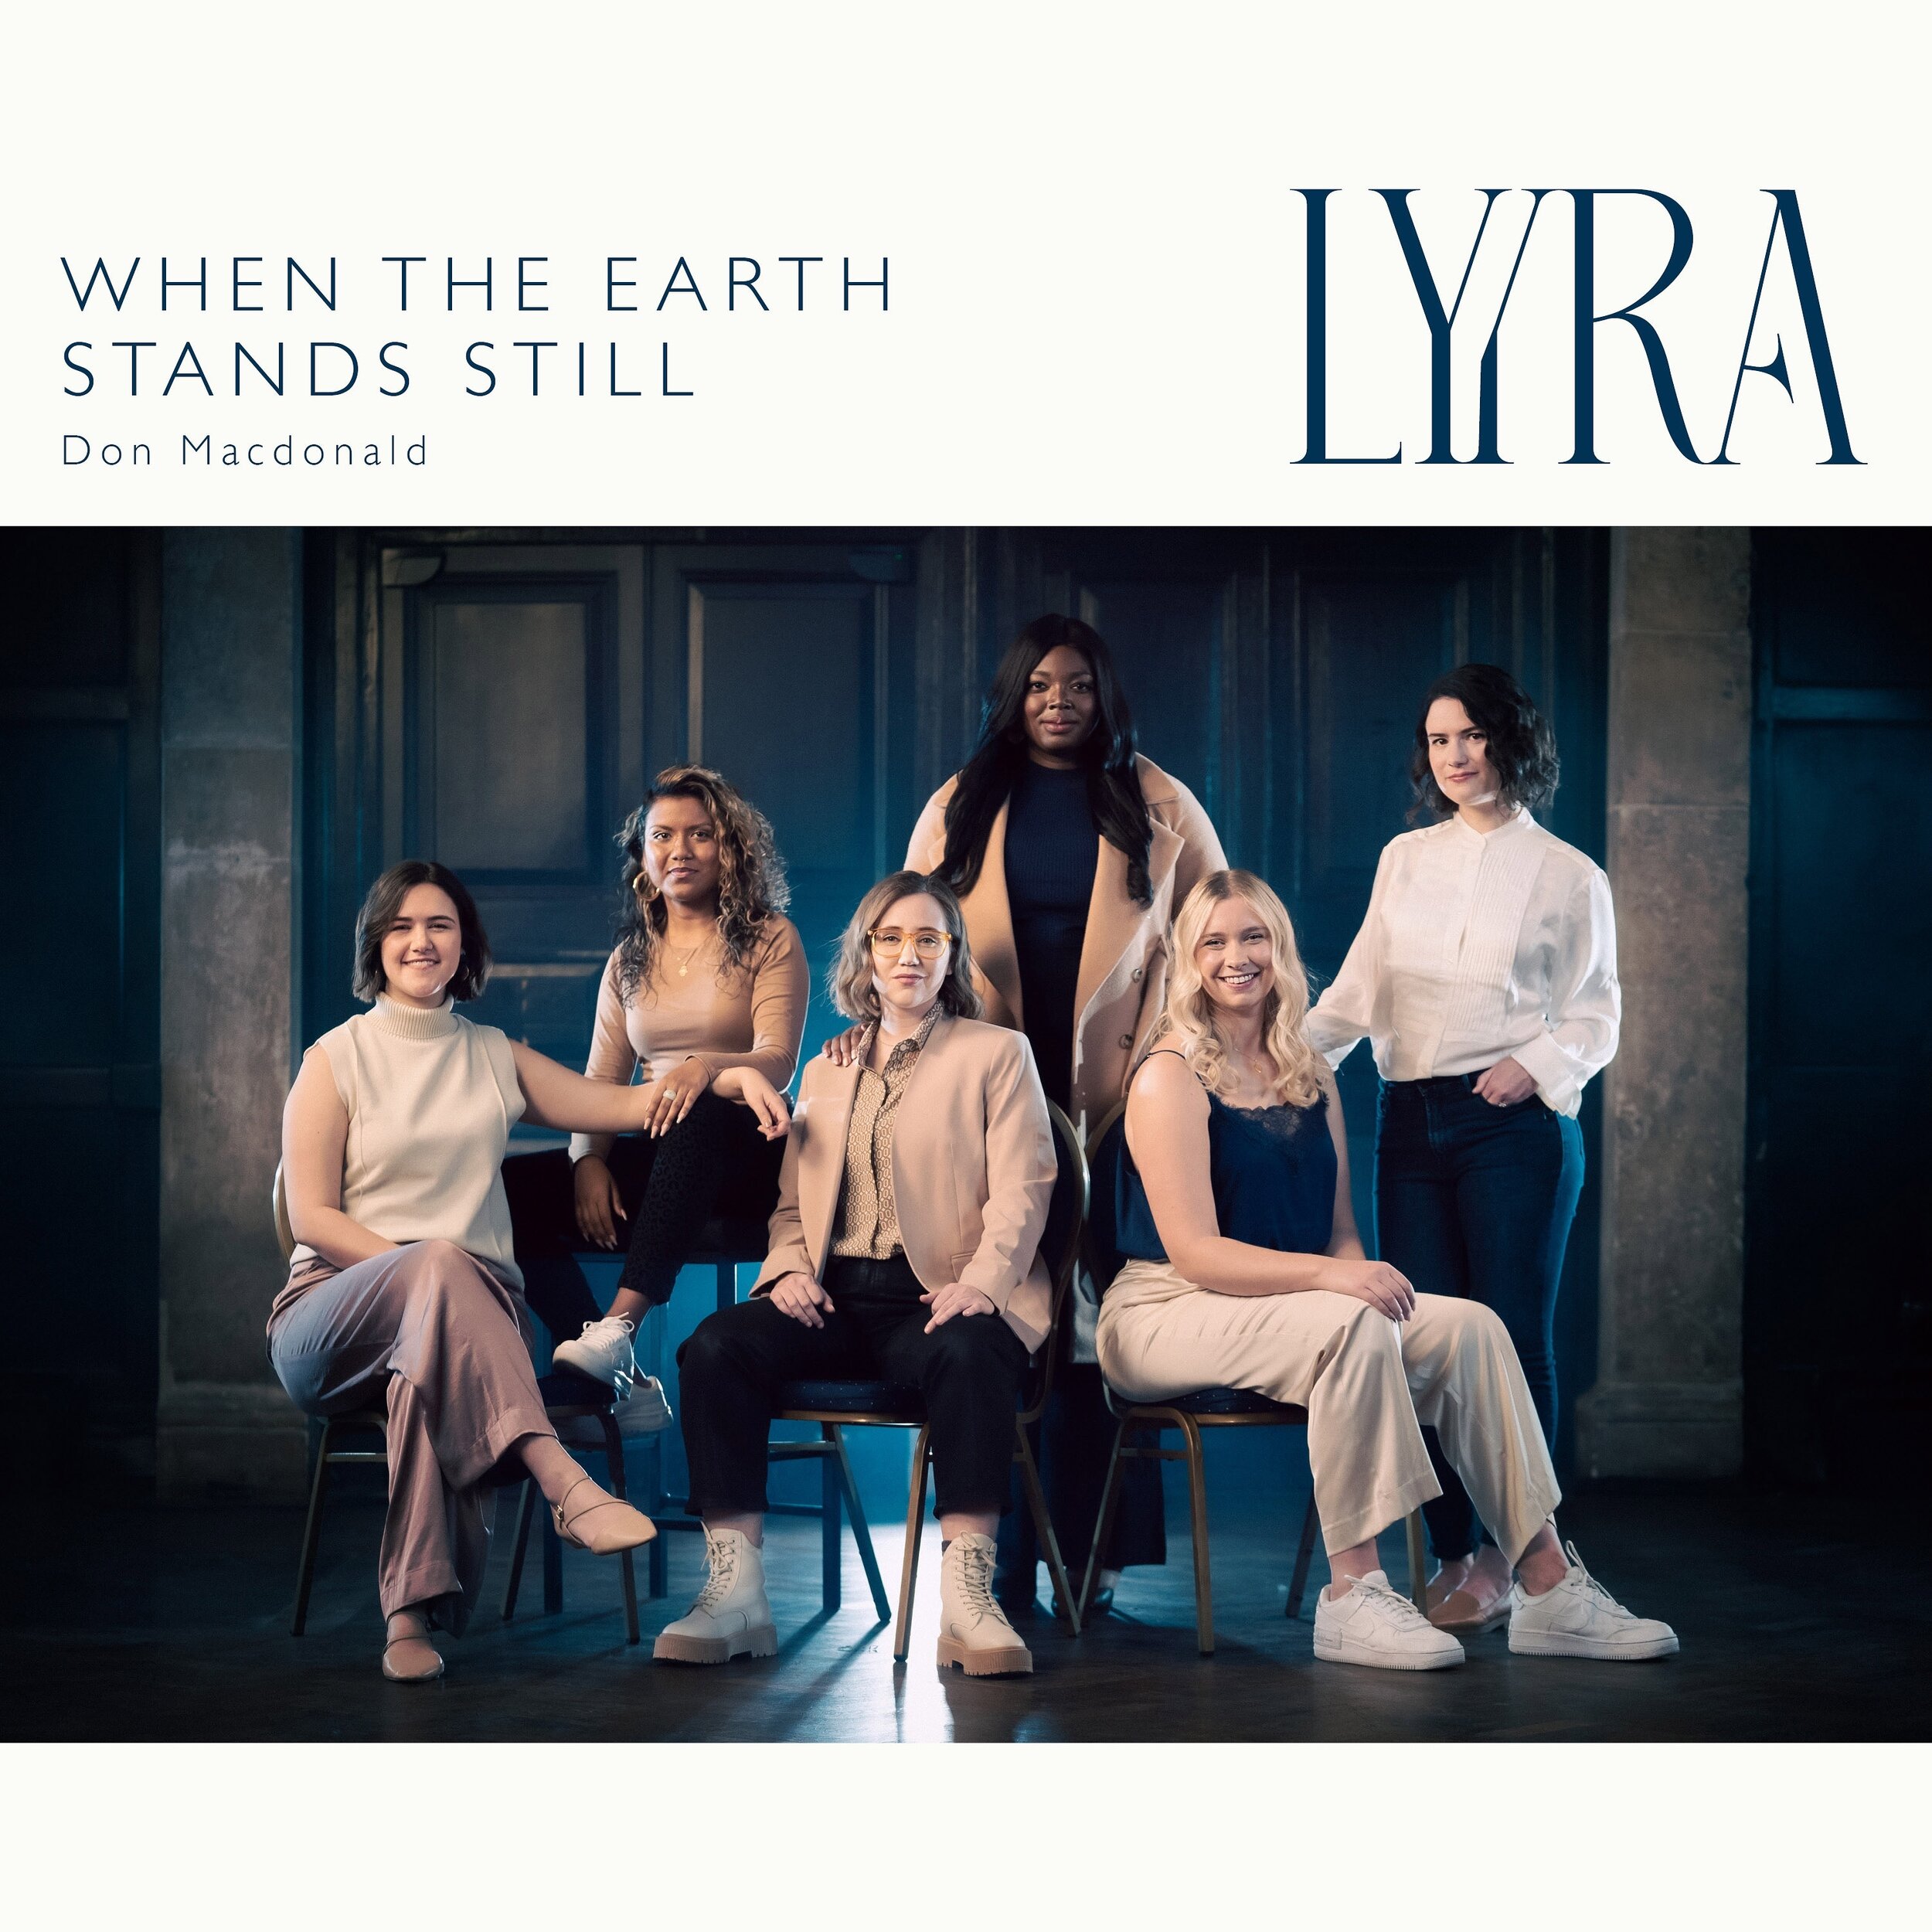 Stream LYYRA&rsquo;s stunning debut single from the link in our bio. 

&lsquo;When the Earth Stands Still&rsquo; by Don MacDonald @macdcomposer @lyyra_official @voces8foundation